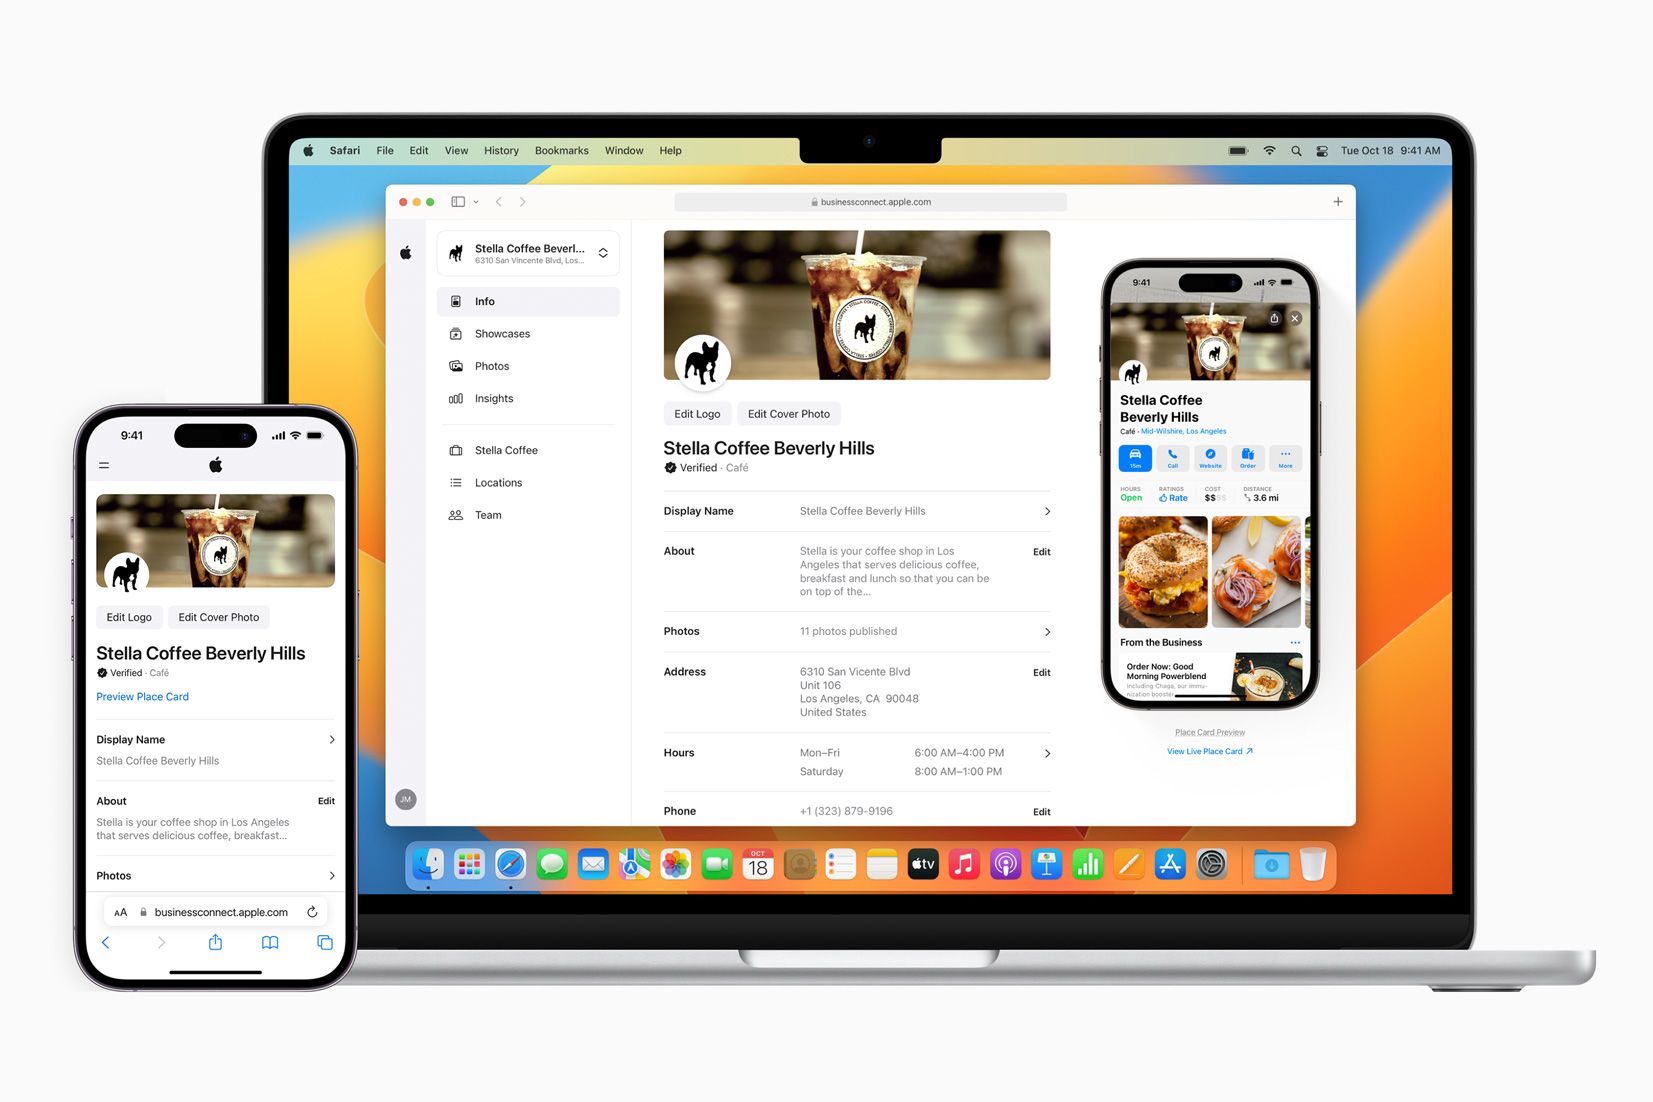 Apple Business Connect tool in use shown on iPhone and MacBook